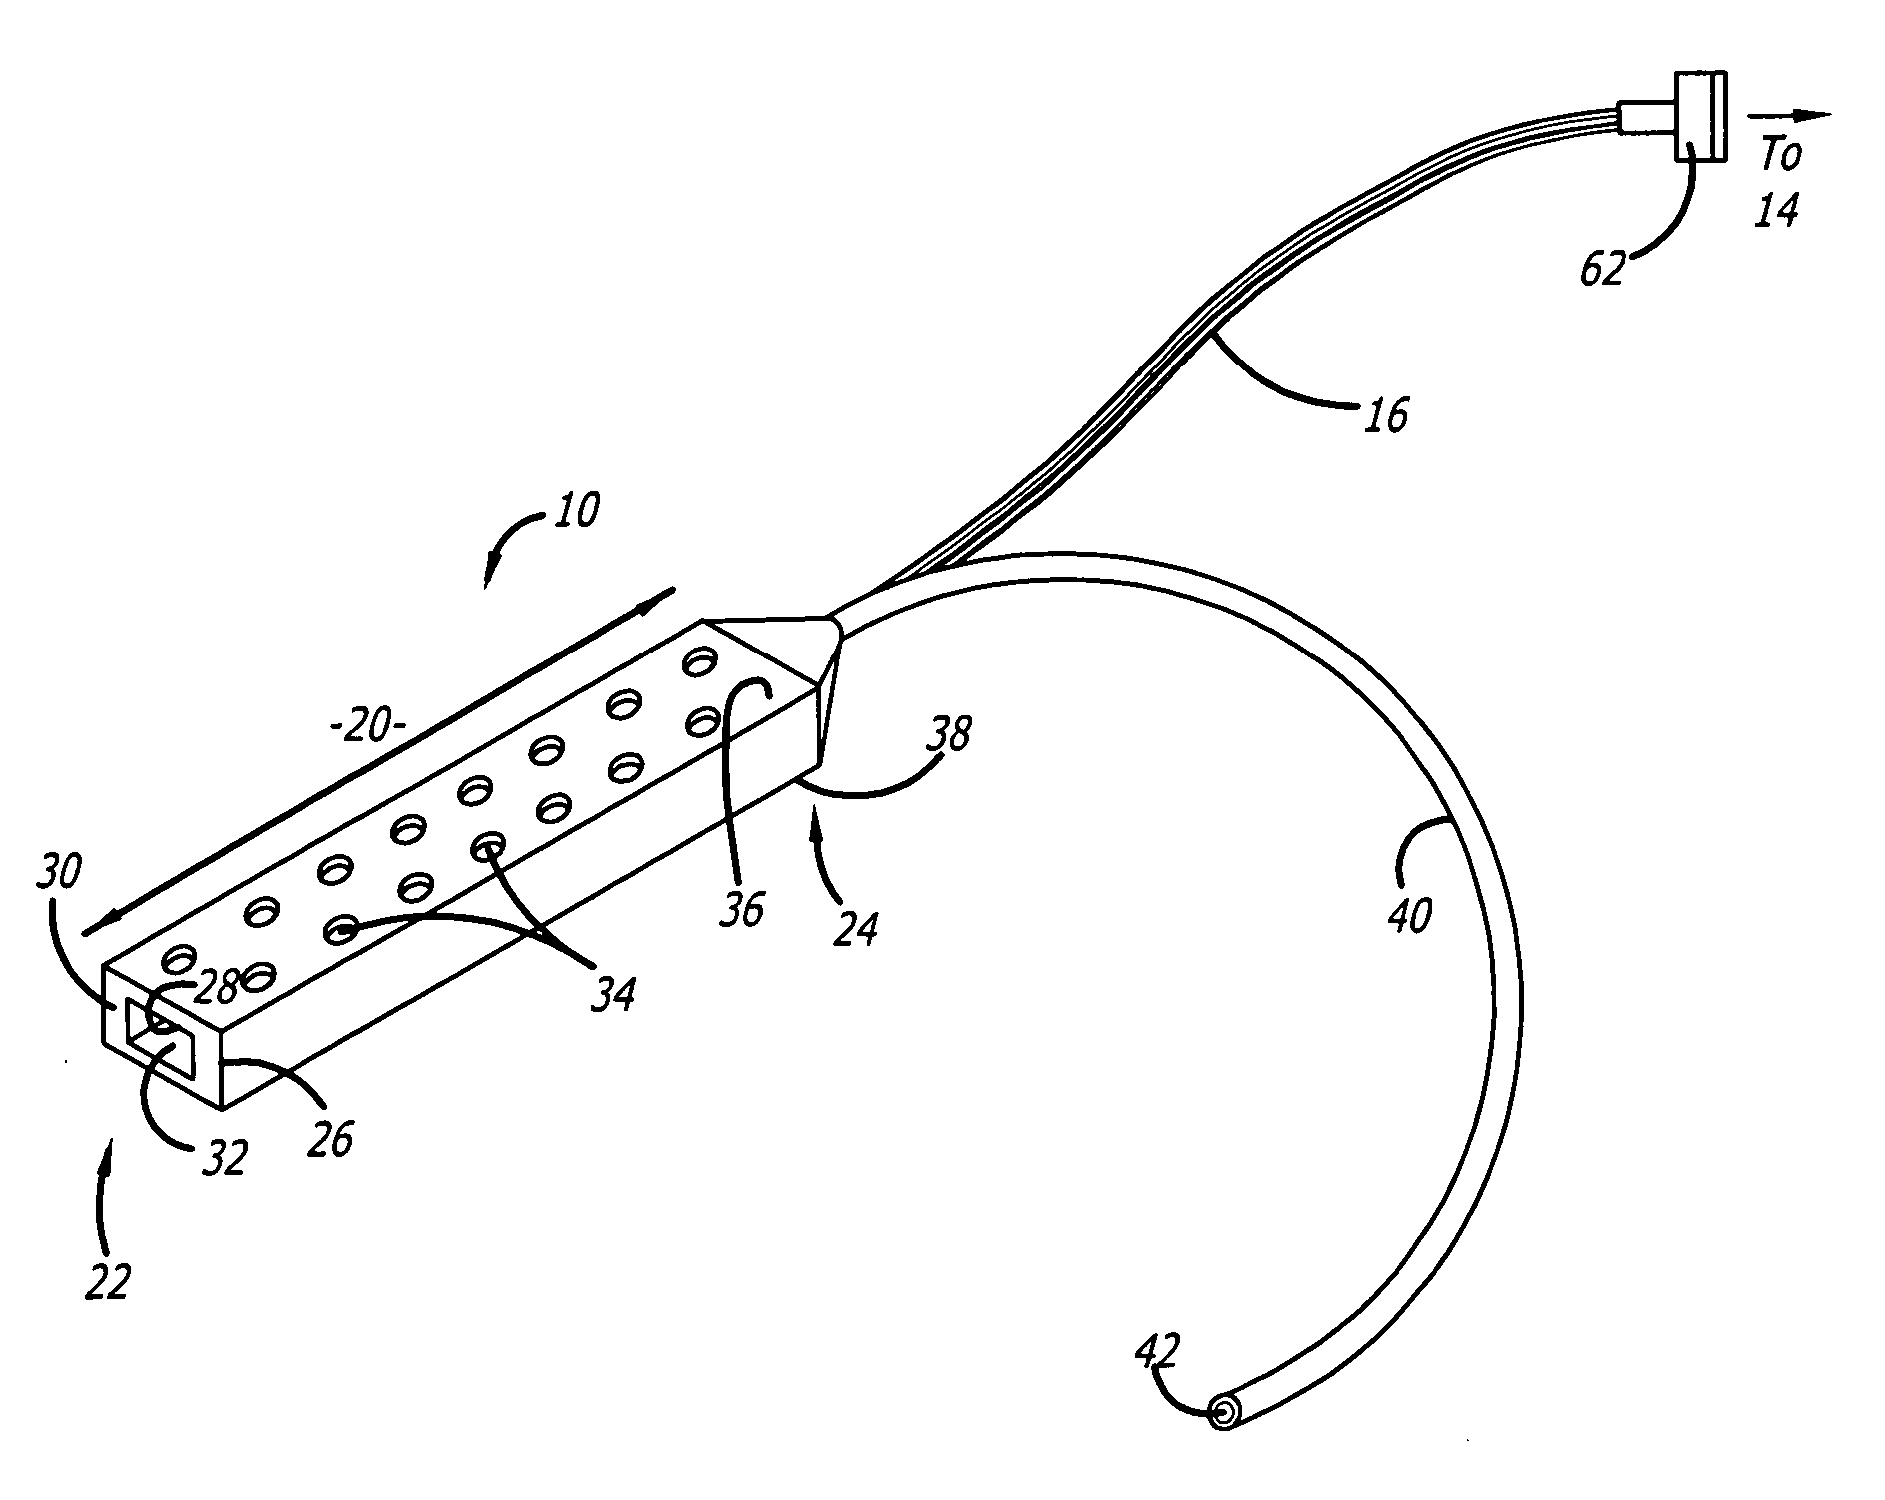 Surgical drain with sensors for monitoring fluid lumen